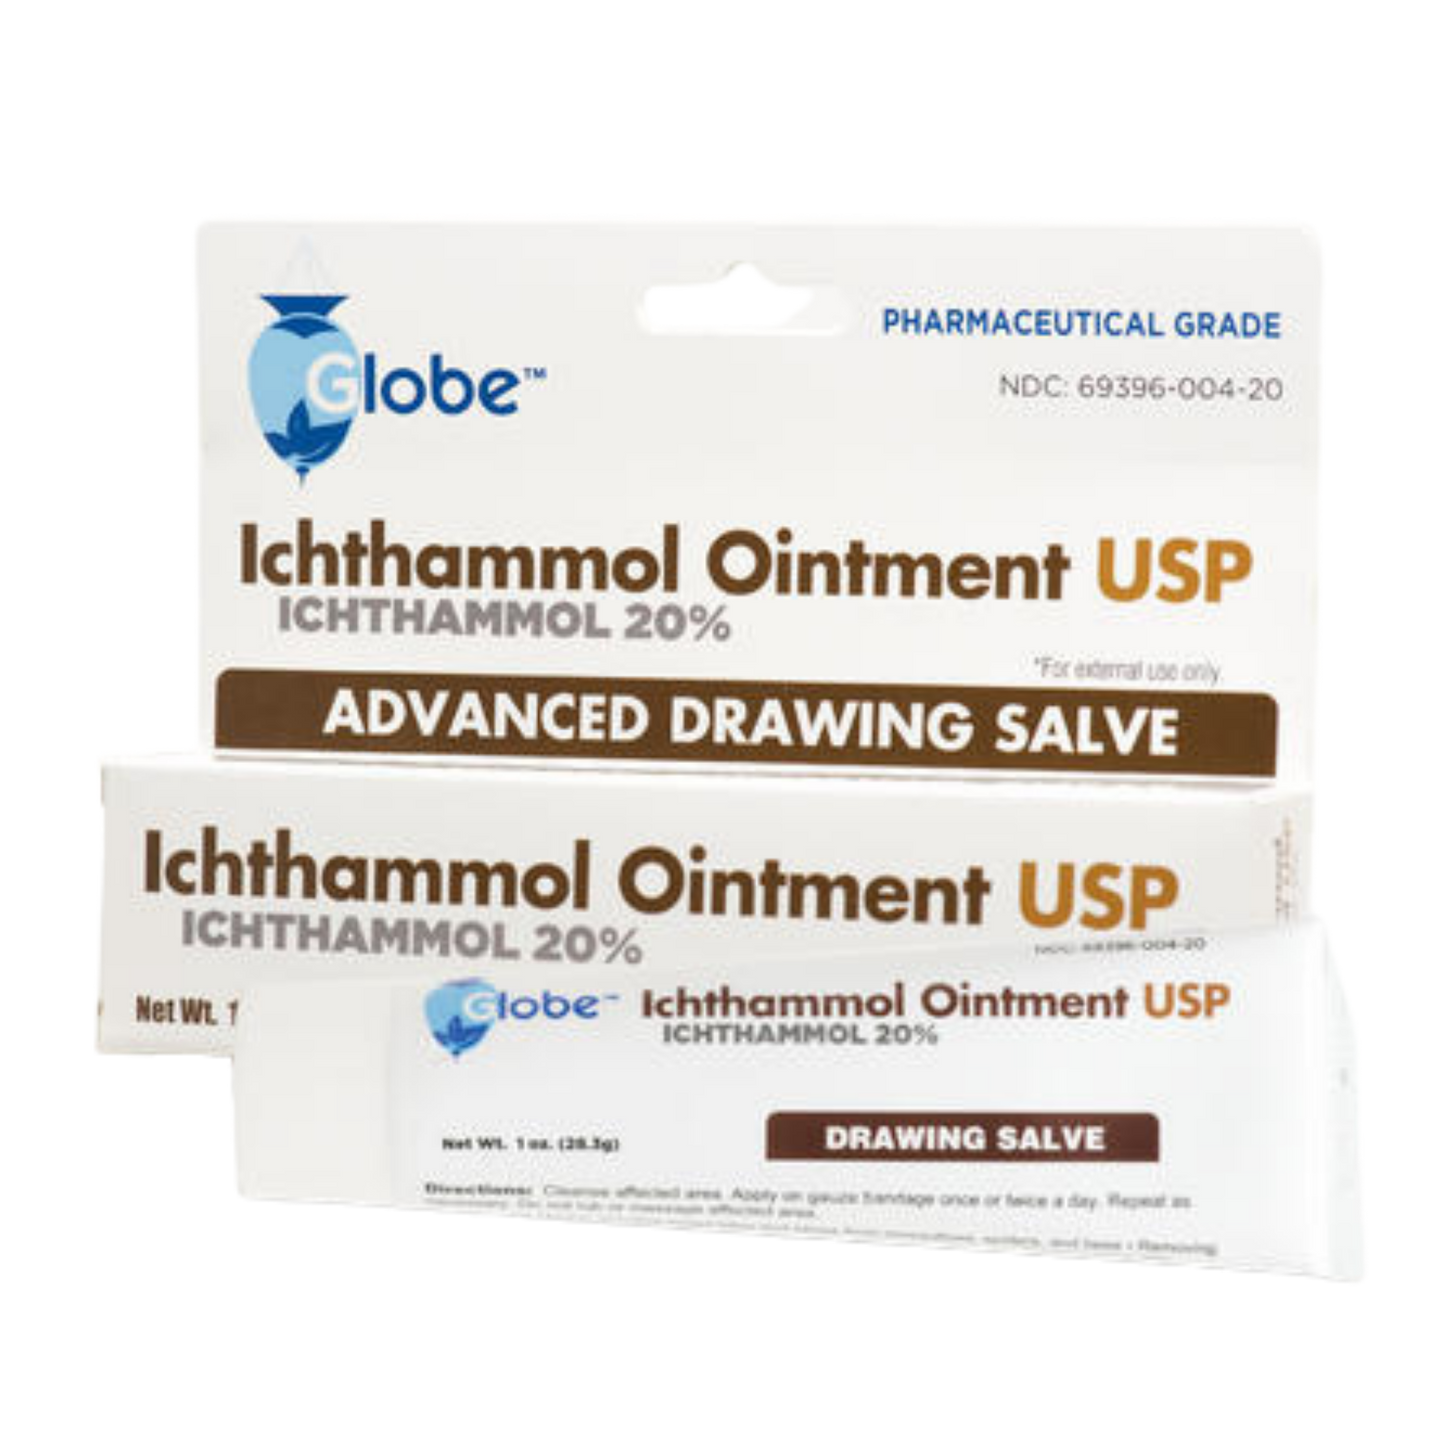 Primary Image of Ichthammol Ointment